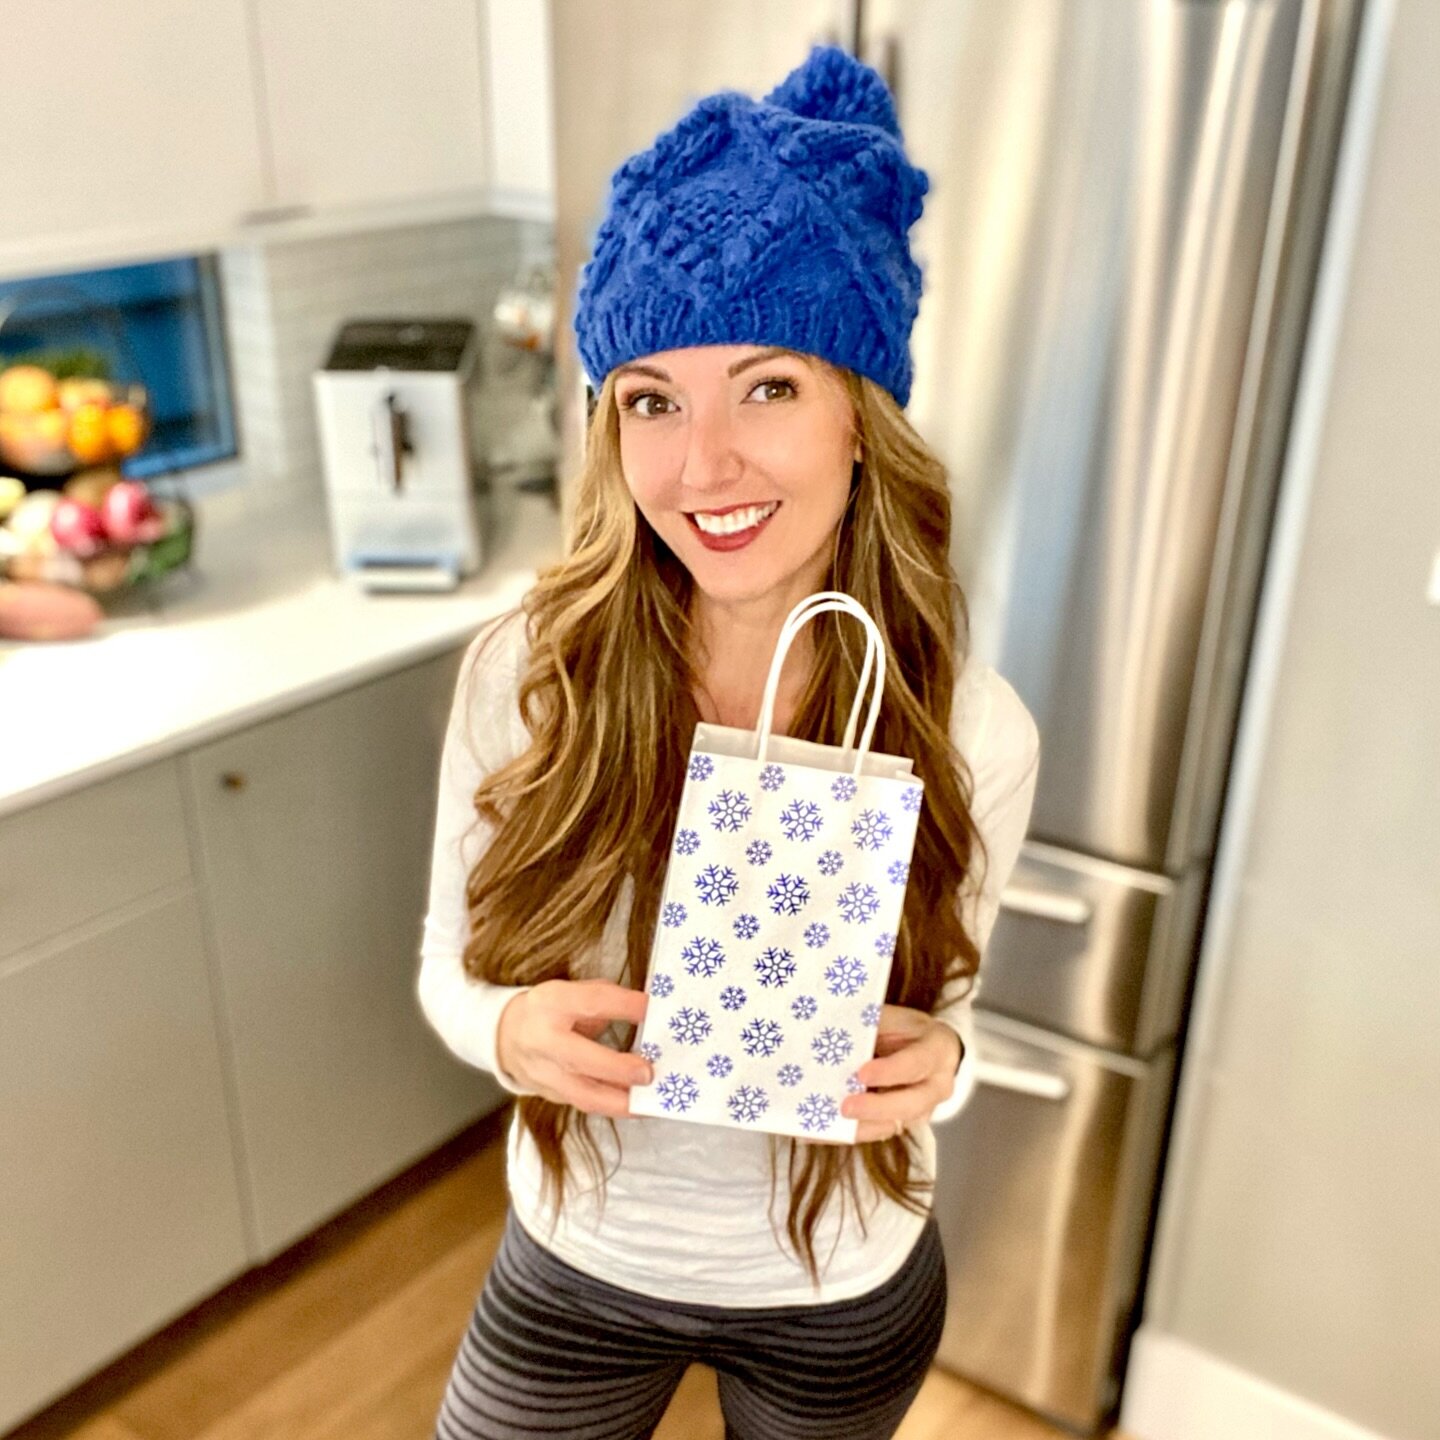 G I V E  AWAY! Cold weather has me in the mood to give away some goodies. 
.
Does anyone else run to the kitchen to bake when it&rsquo;s cold outside? Something about baked comfort foods warms the heart. 
.
What should we put in the giveaway? 
.
Let 